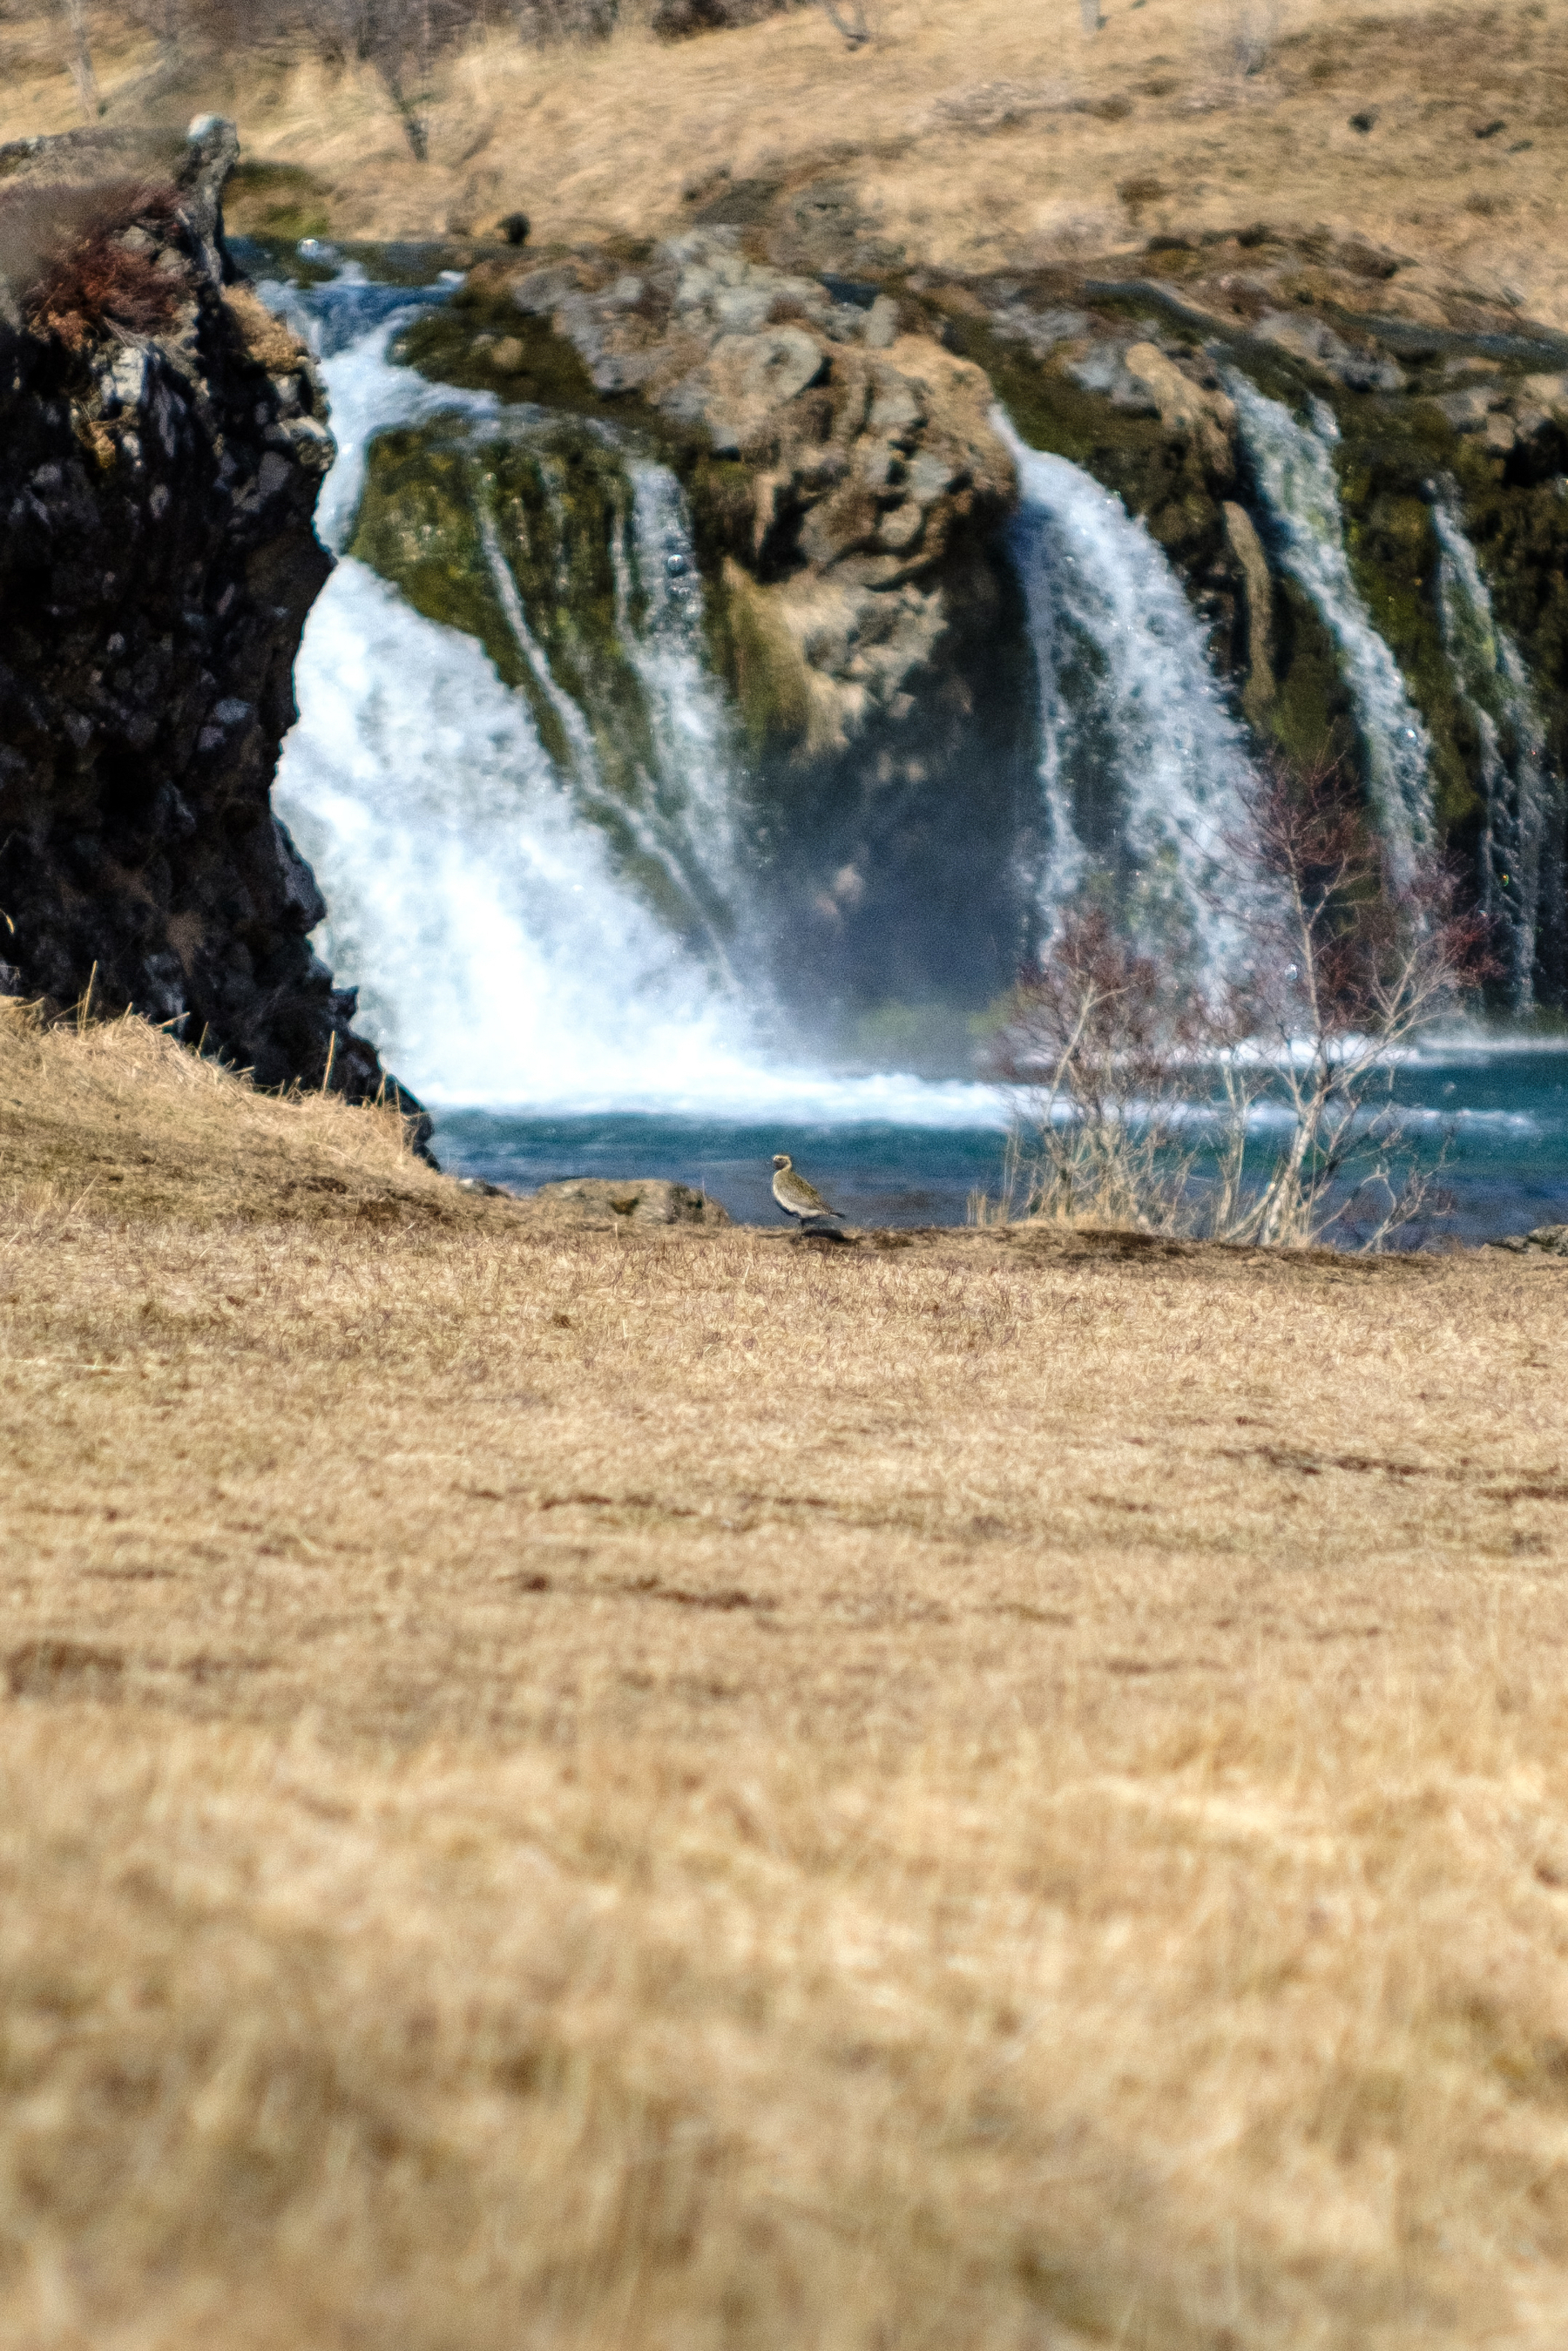 A slightly out of focus photo of a bird, golden plover, posing by a waterfall